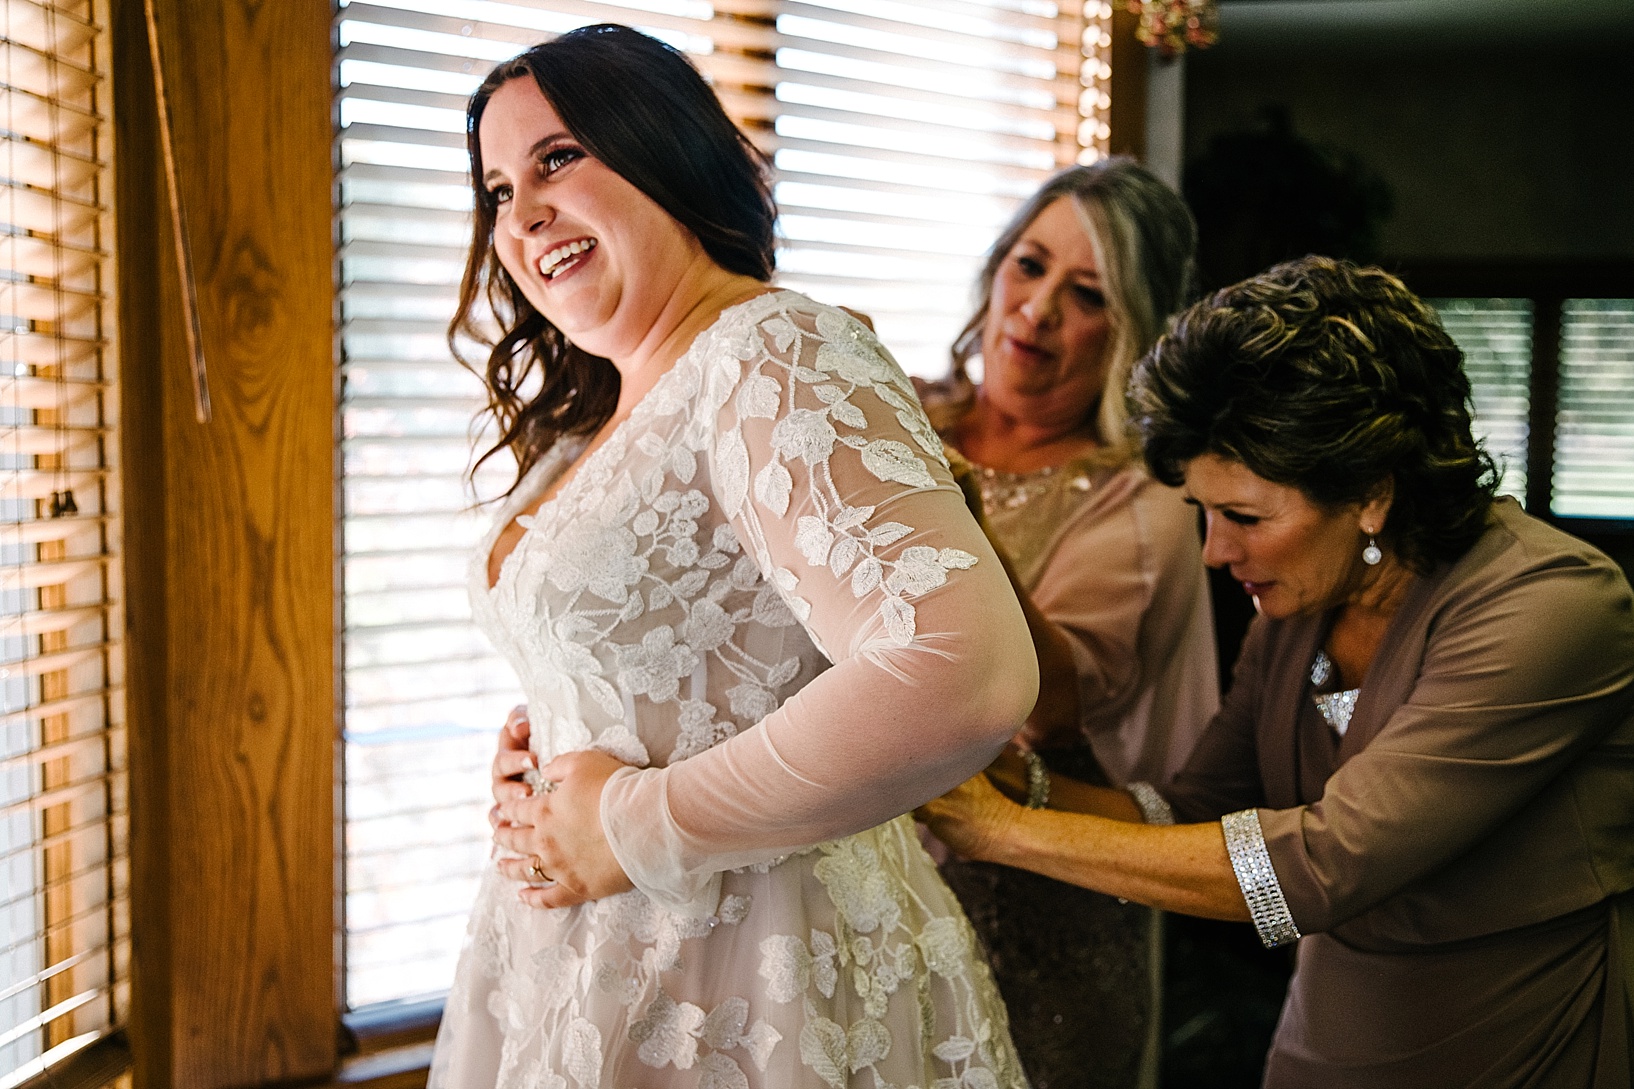 bride's mothers helping her into wedding dress